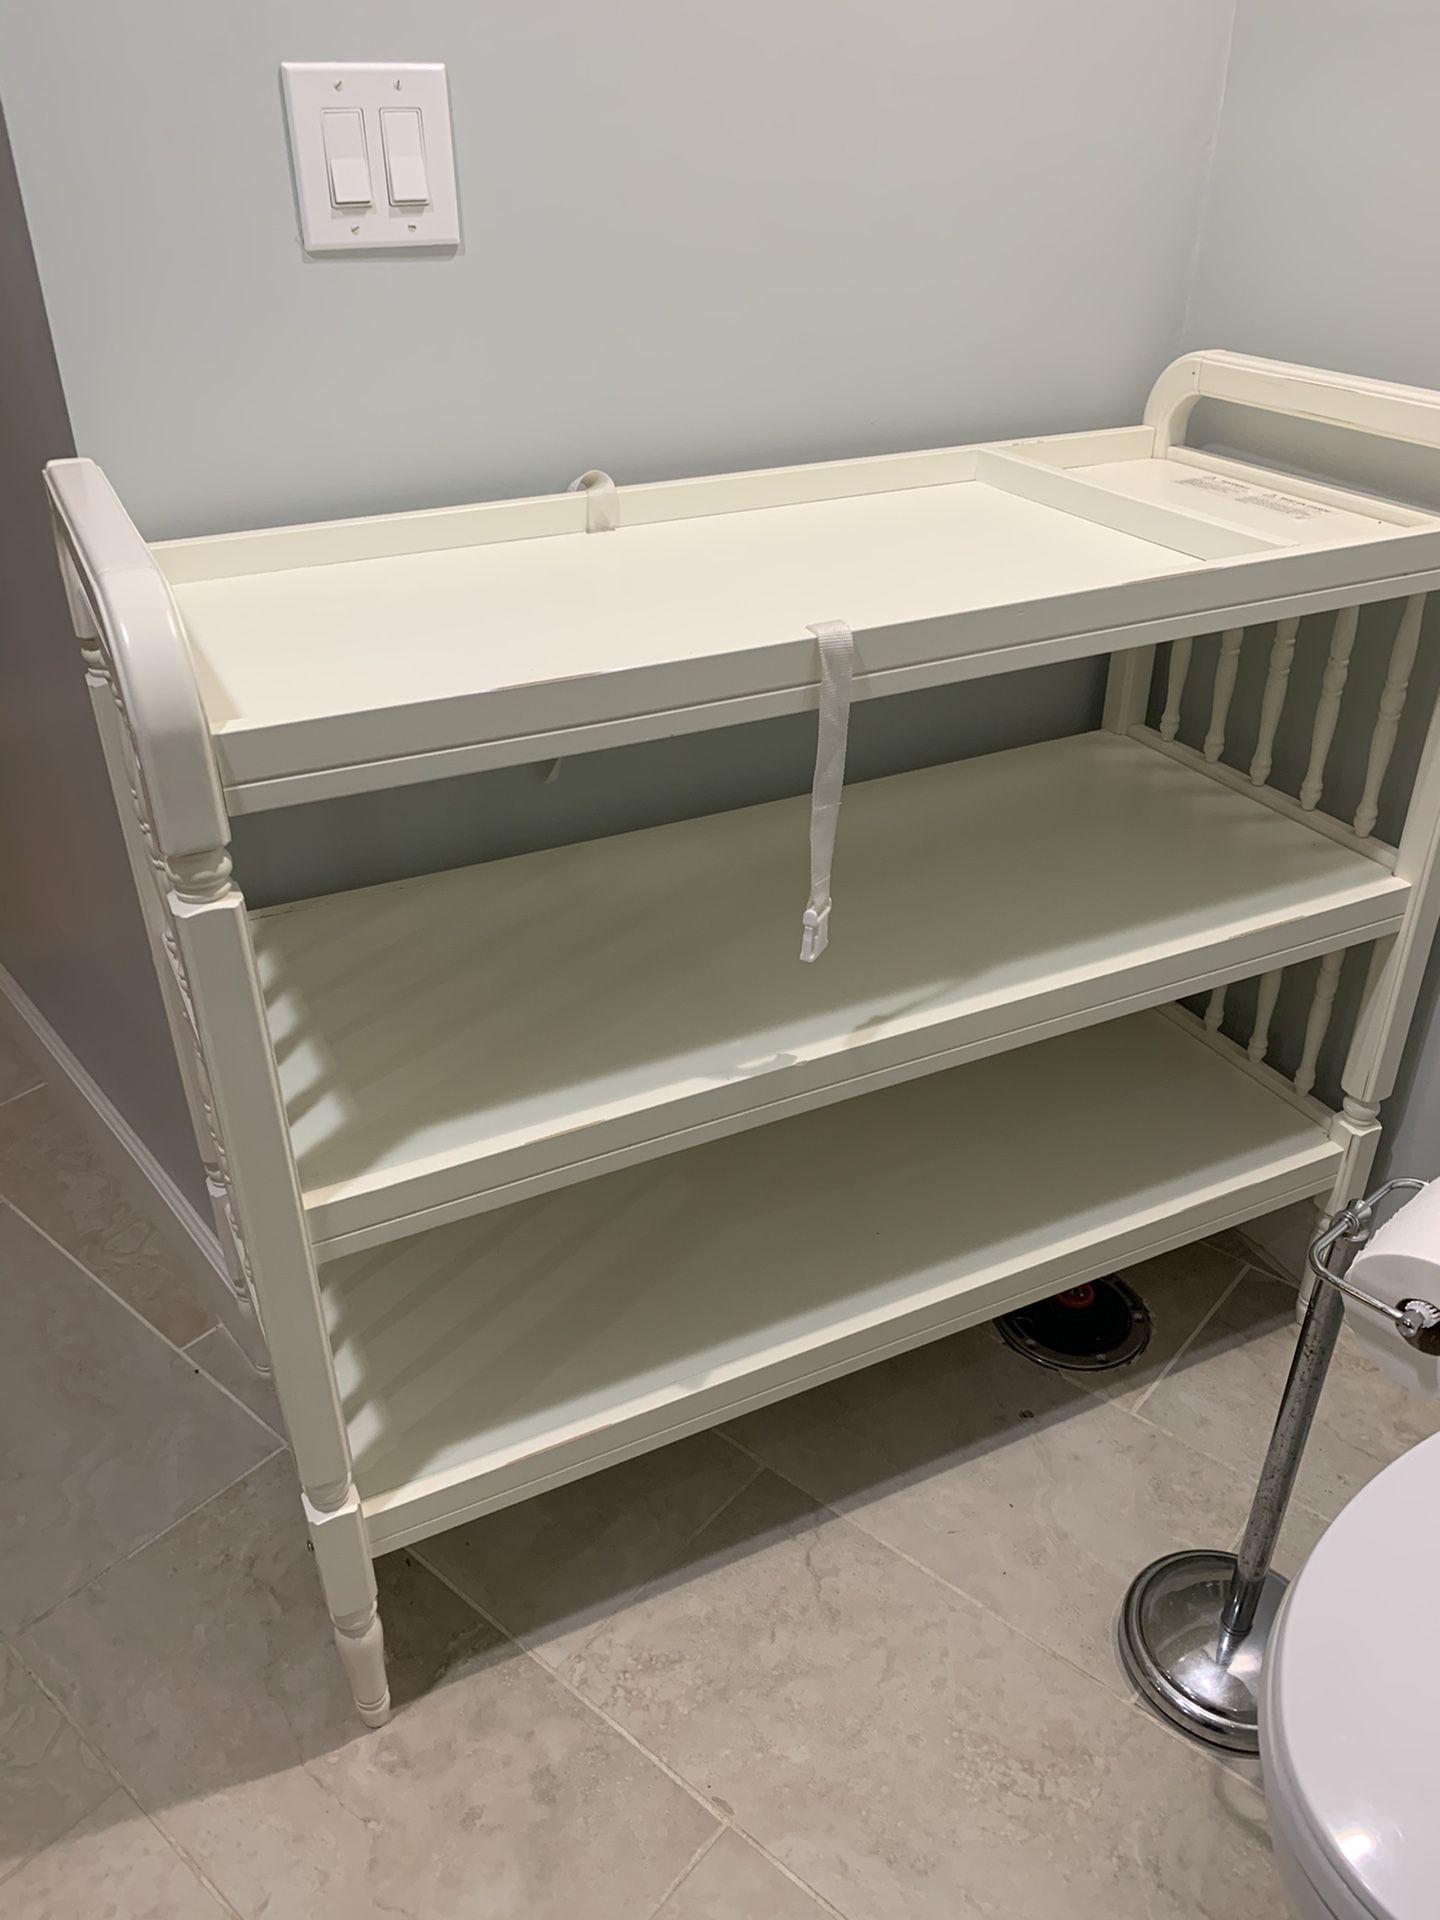 Pottery barn changing table white spindle design